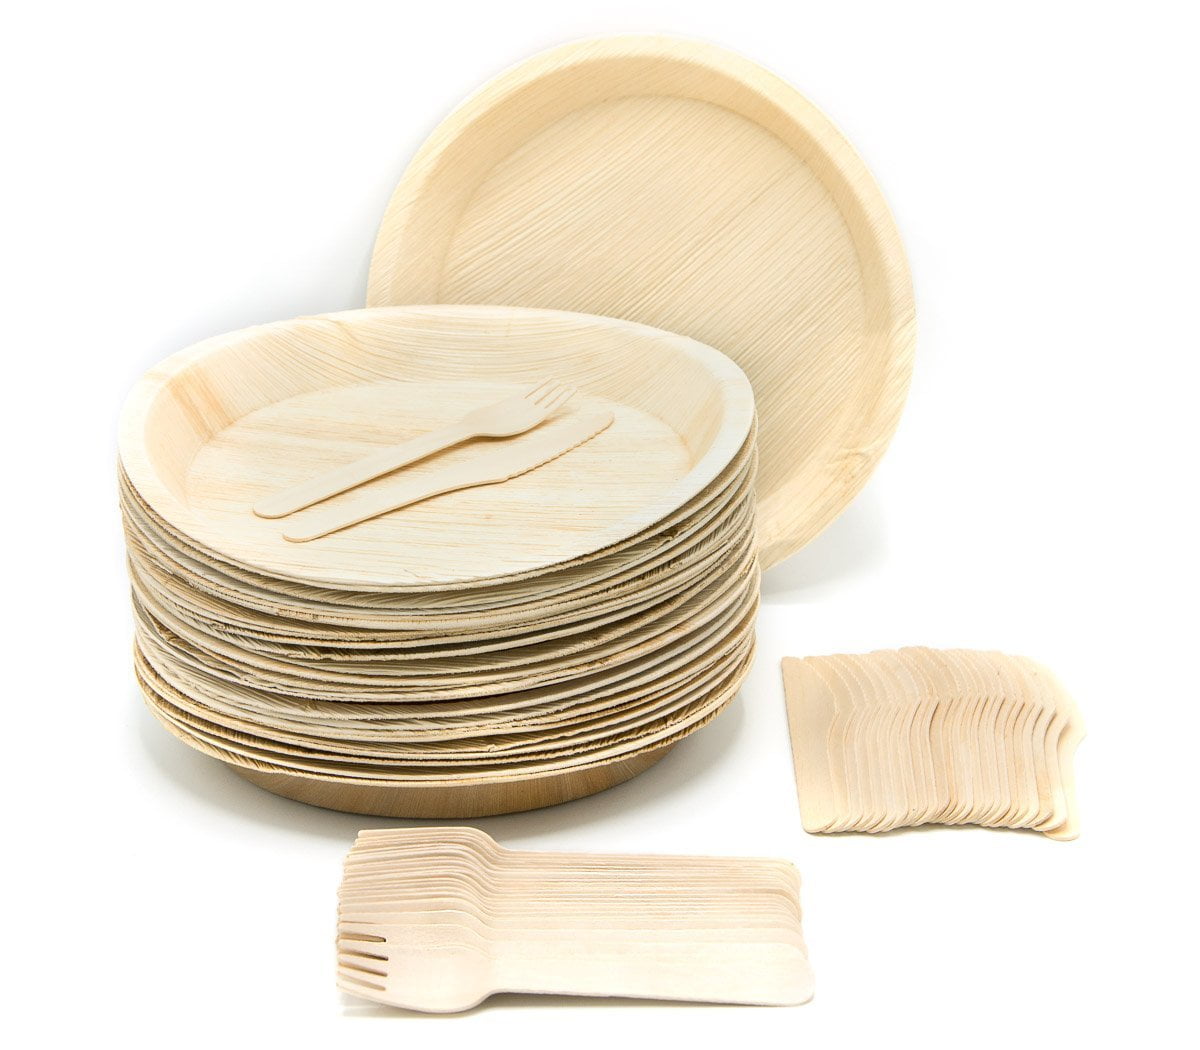 Lombok Tableware Plates Round Wood Effect Bio Disposable Party Supplies MANY SIZES 